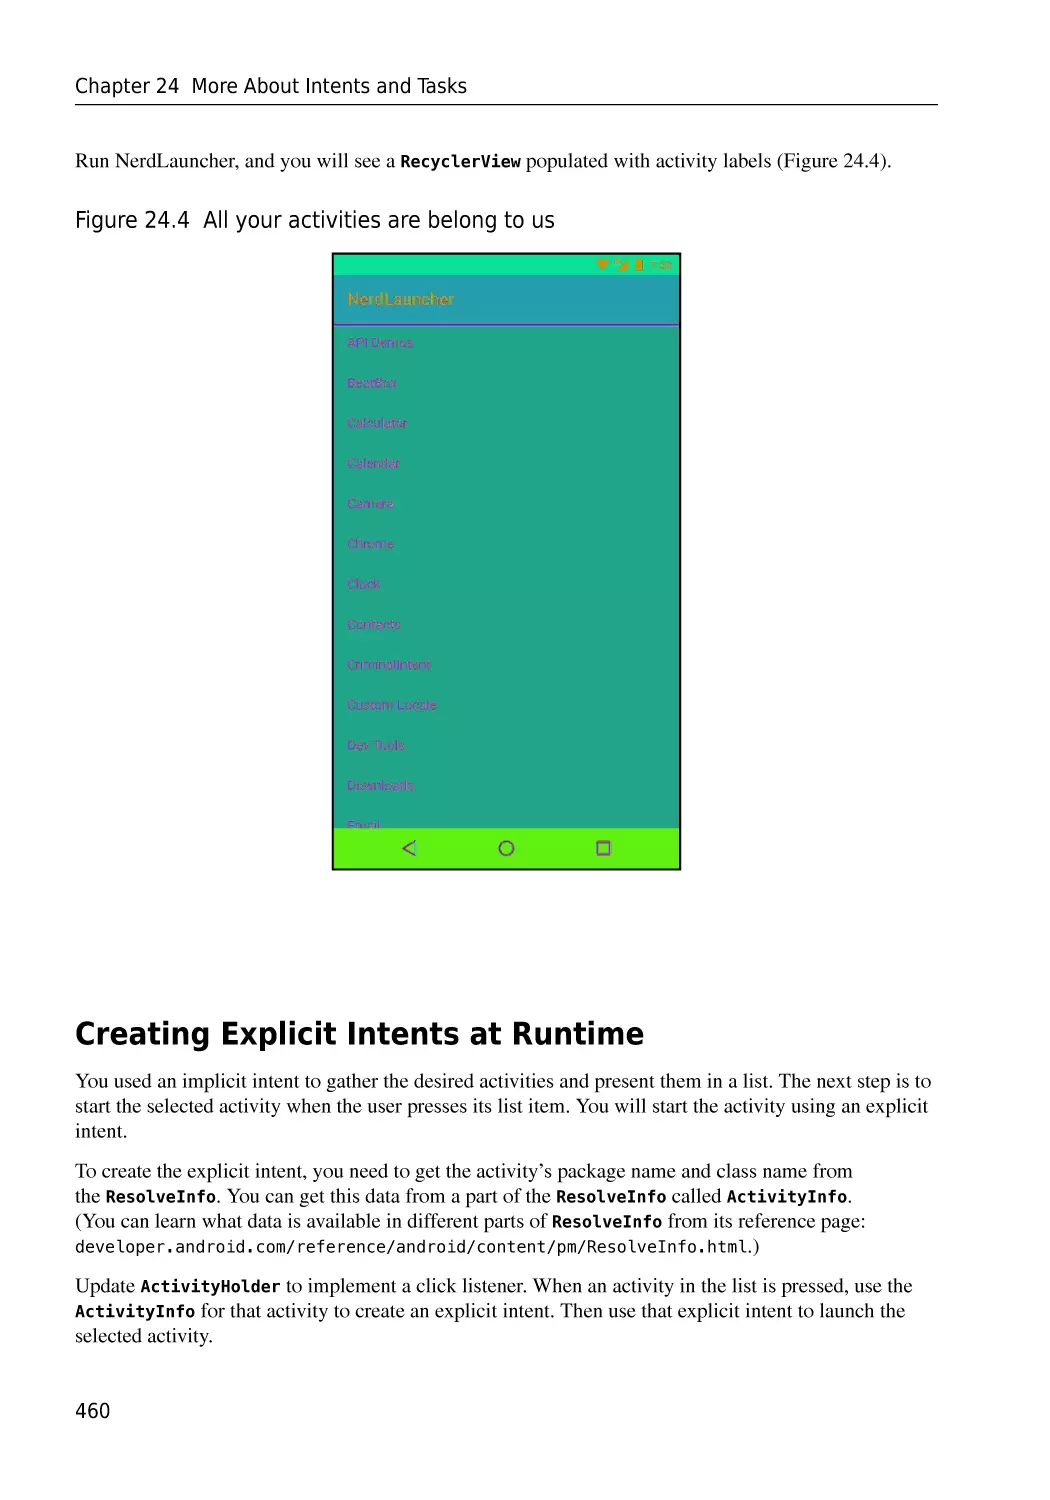 Creating Explicit Intents at Runtime